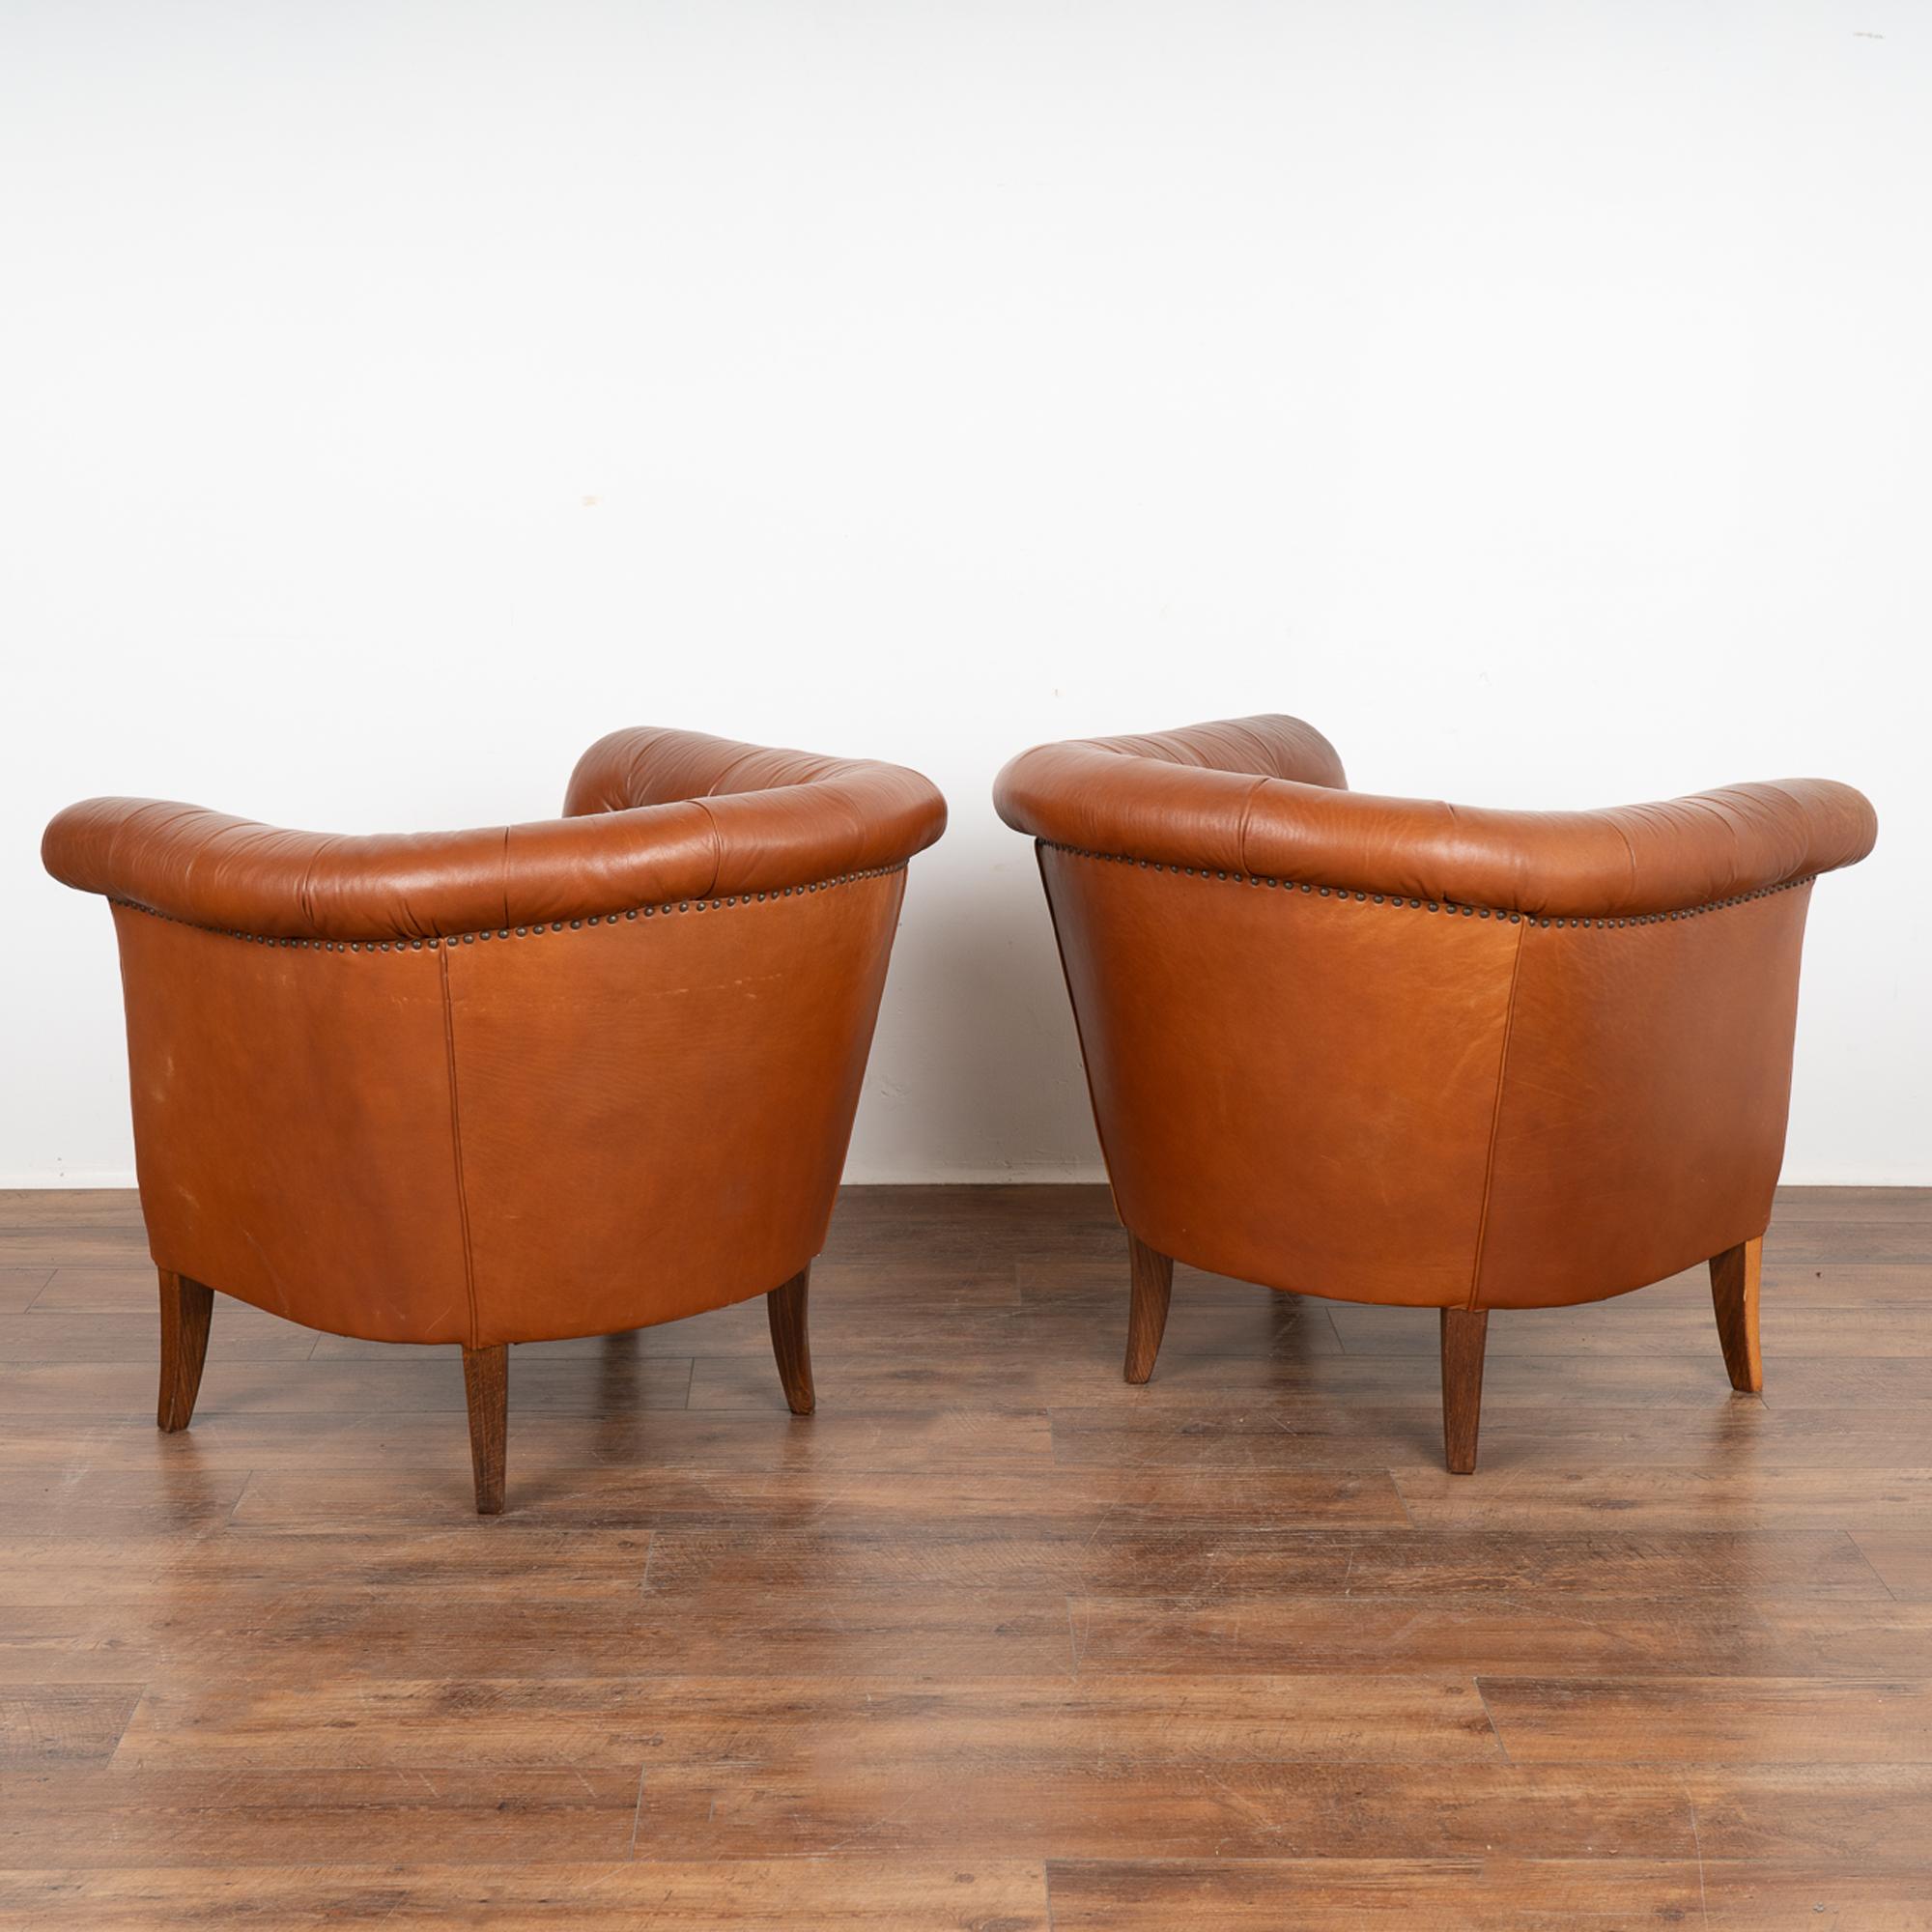 Pair, Mid Century Brown Leather Barrel Back Arm Chairs, Denmark circa 1960-70 For Sale 3